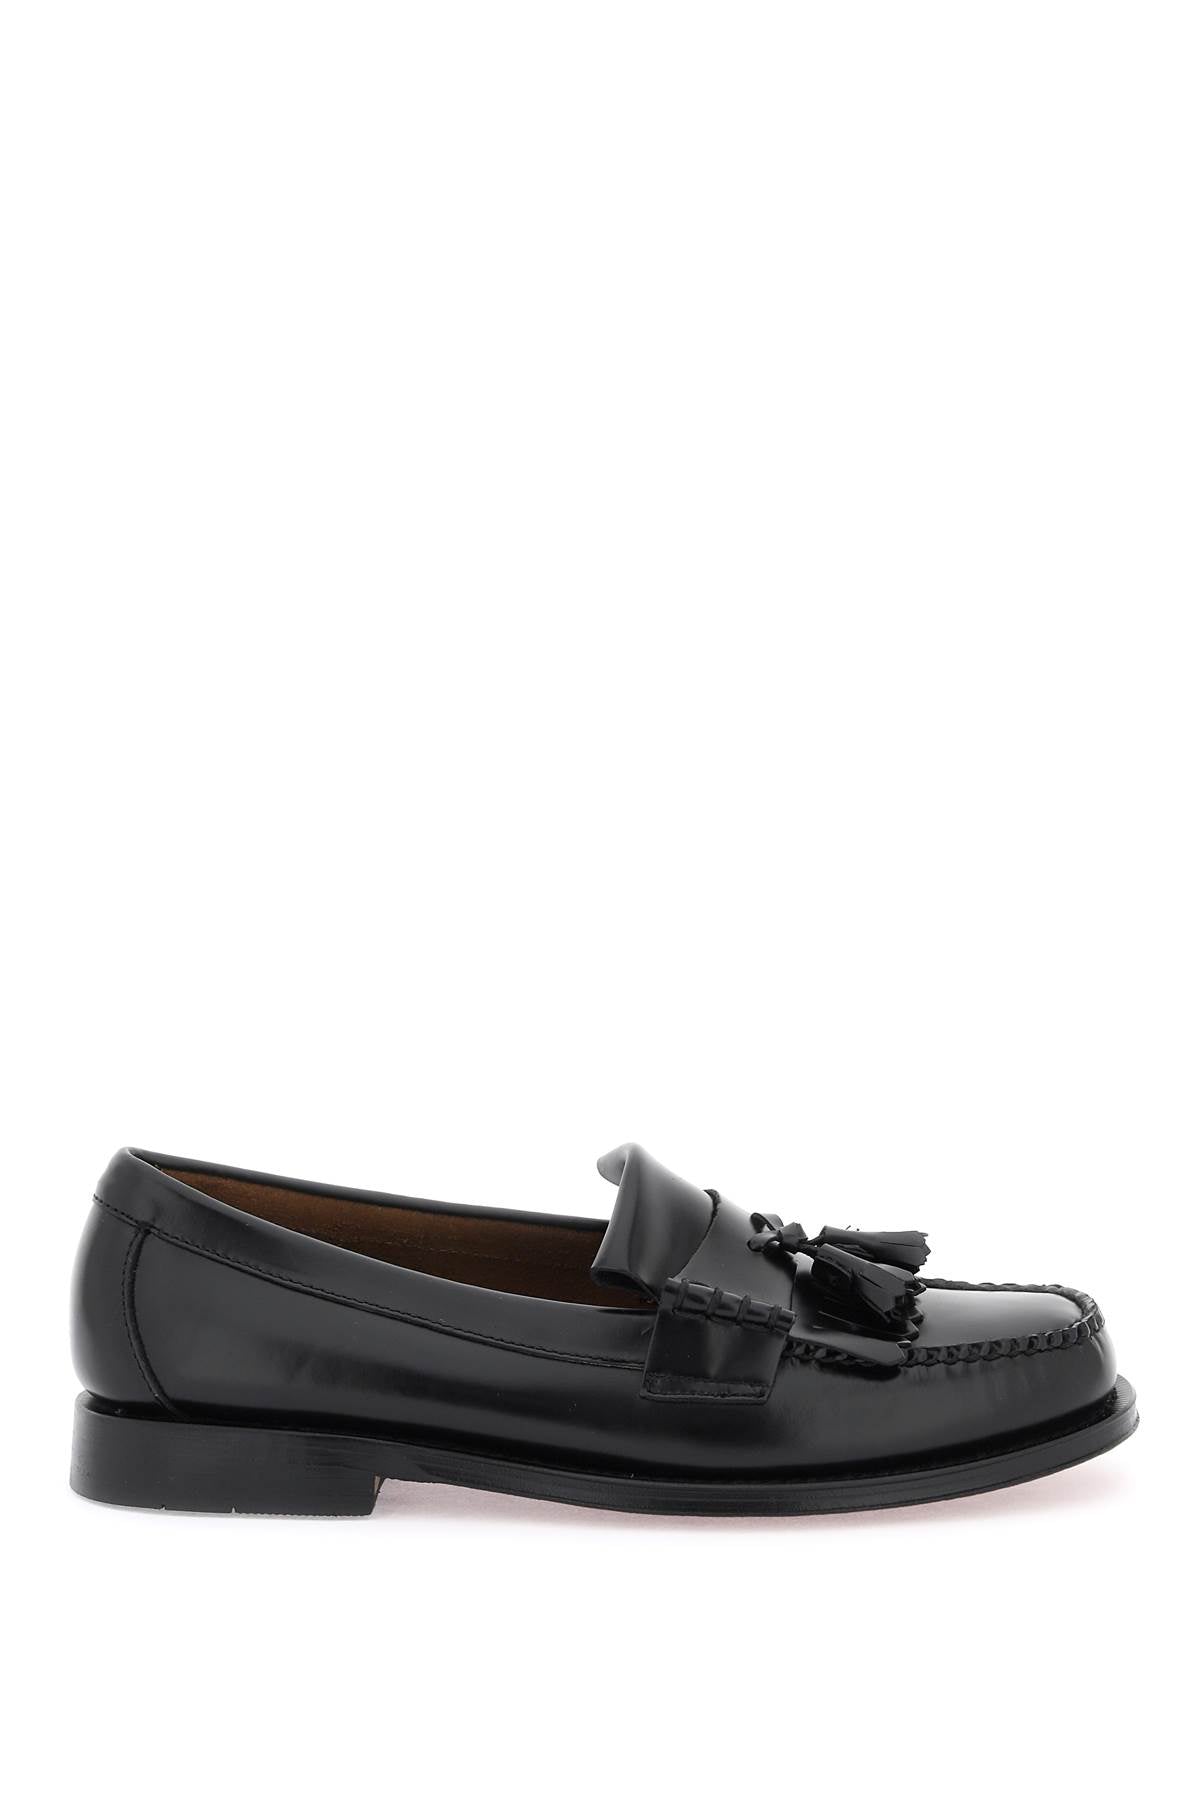 G.h. bass esther kiltie weejuns loafers-0